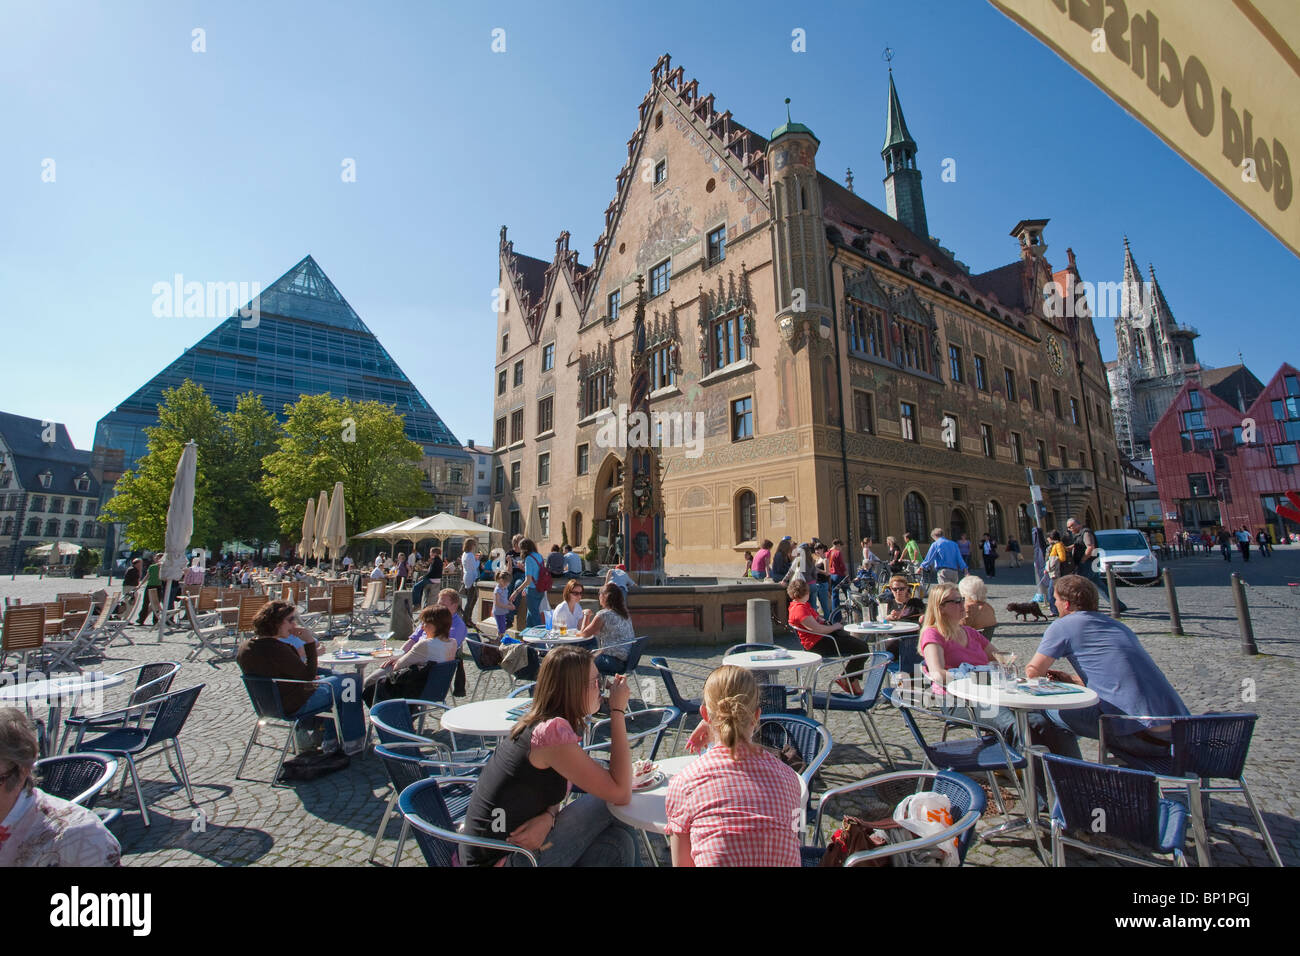 CAFE IN FRONT OF TOWN HALL, PUBLIC LIBRARY LEFT MARKET PLACE, ULM, BADEN-WURTTEMBERG, GERMANY Stock Photo